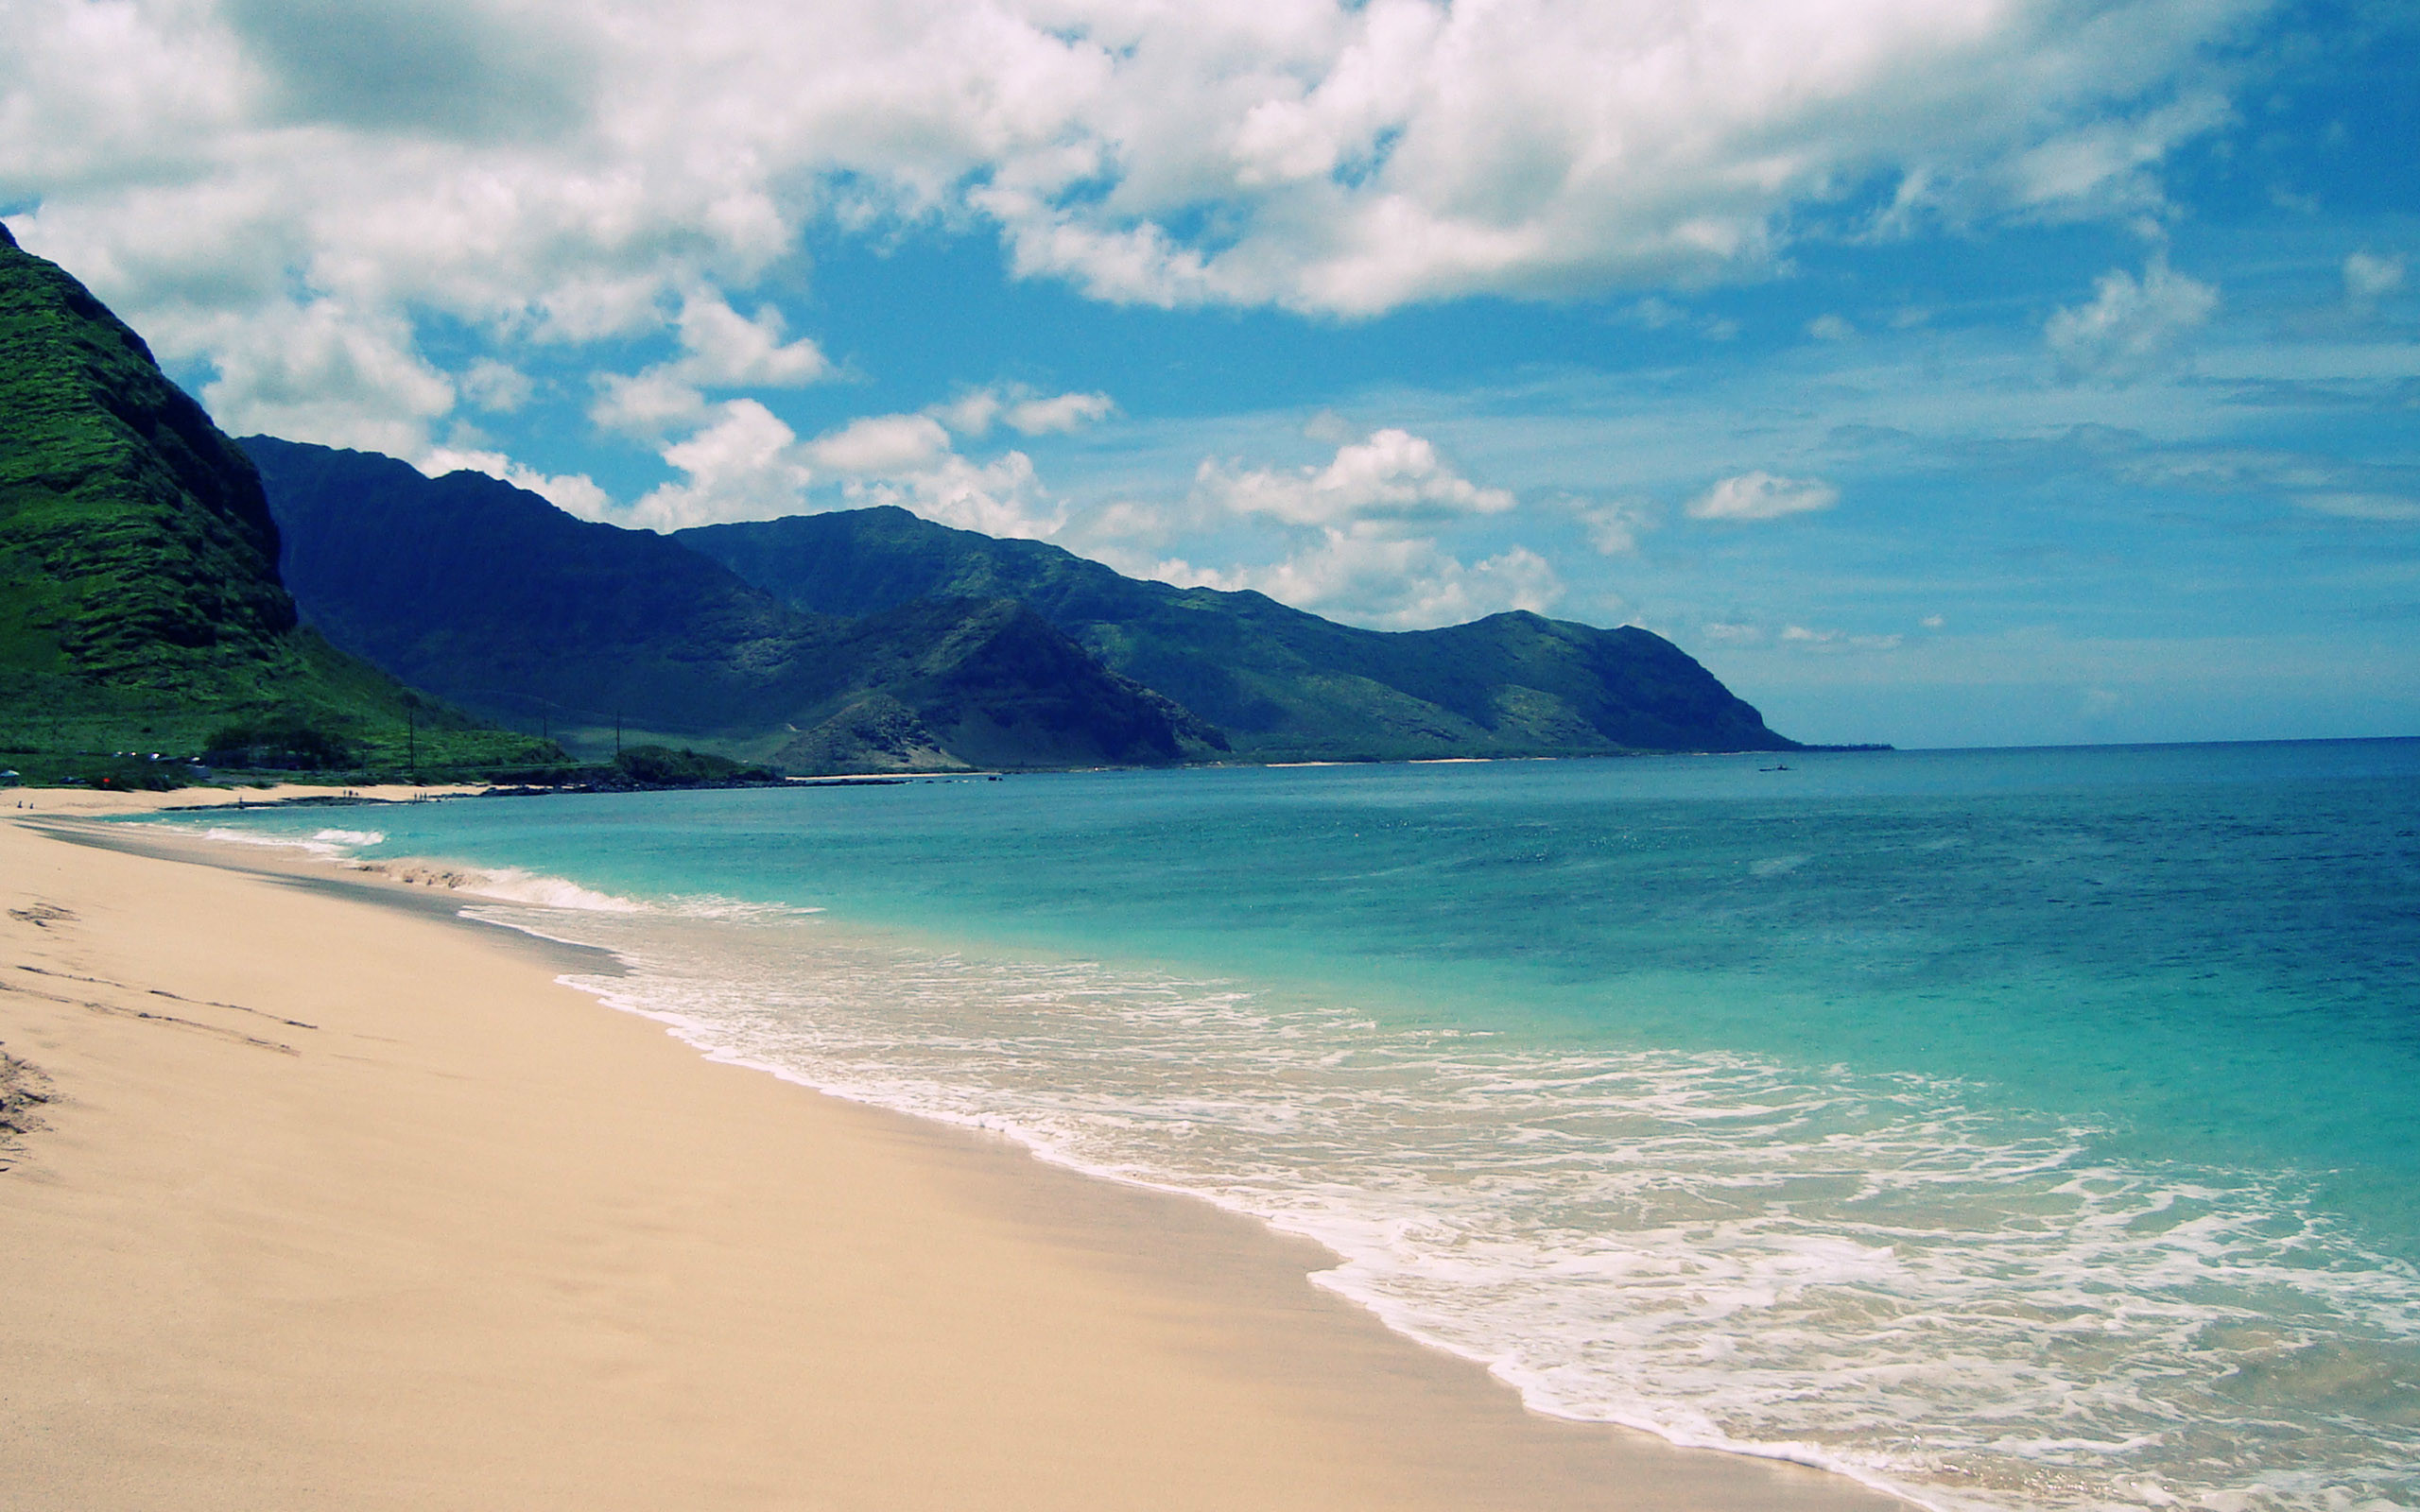 Hawaii Beach Wallpaper for PC Full HD Pictures